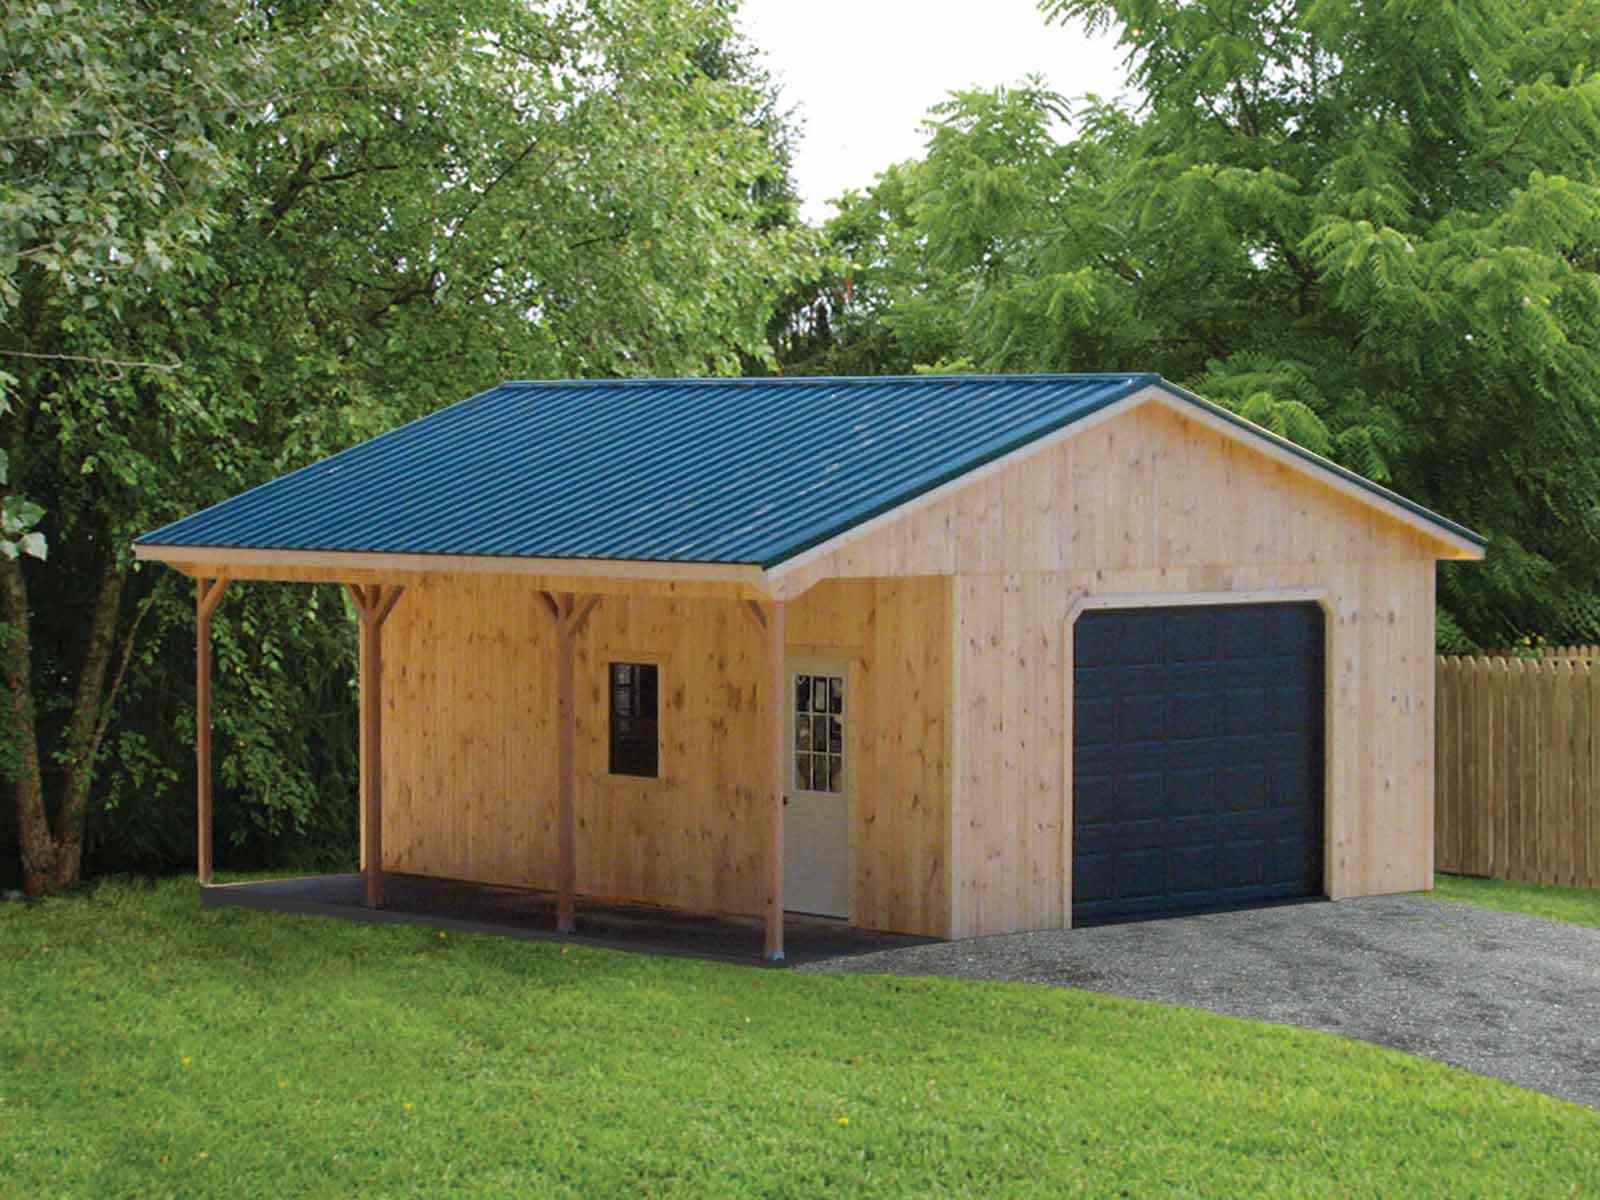 Shed plans 12x16 with porch additions  Guide Source